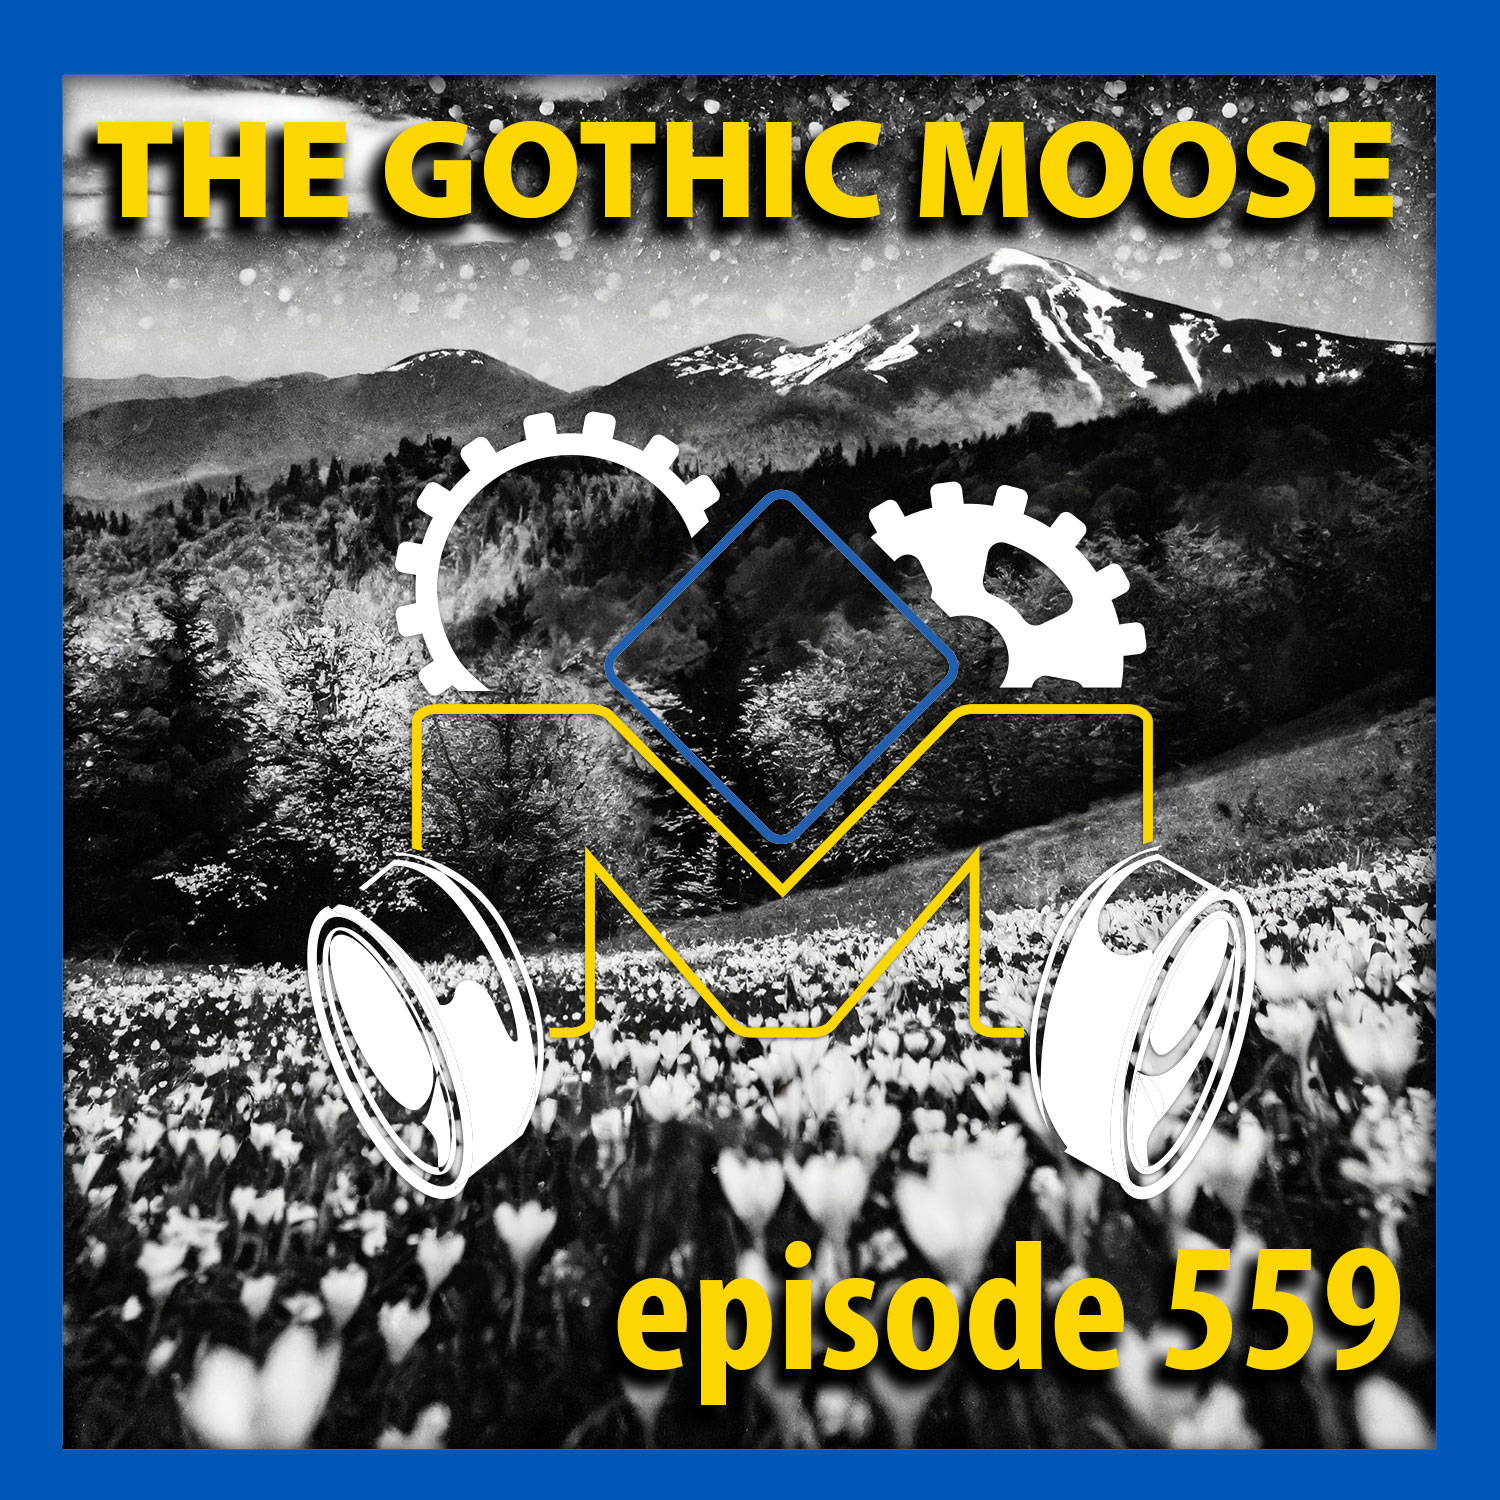 The Gothic Moose – Episode 559 – All Ukrainian bands or bands supporting Ukraine